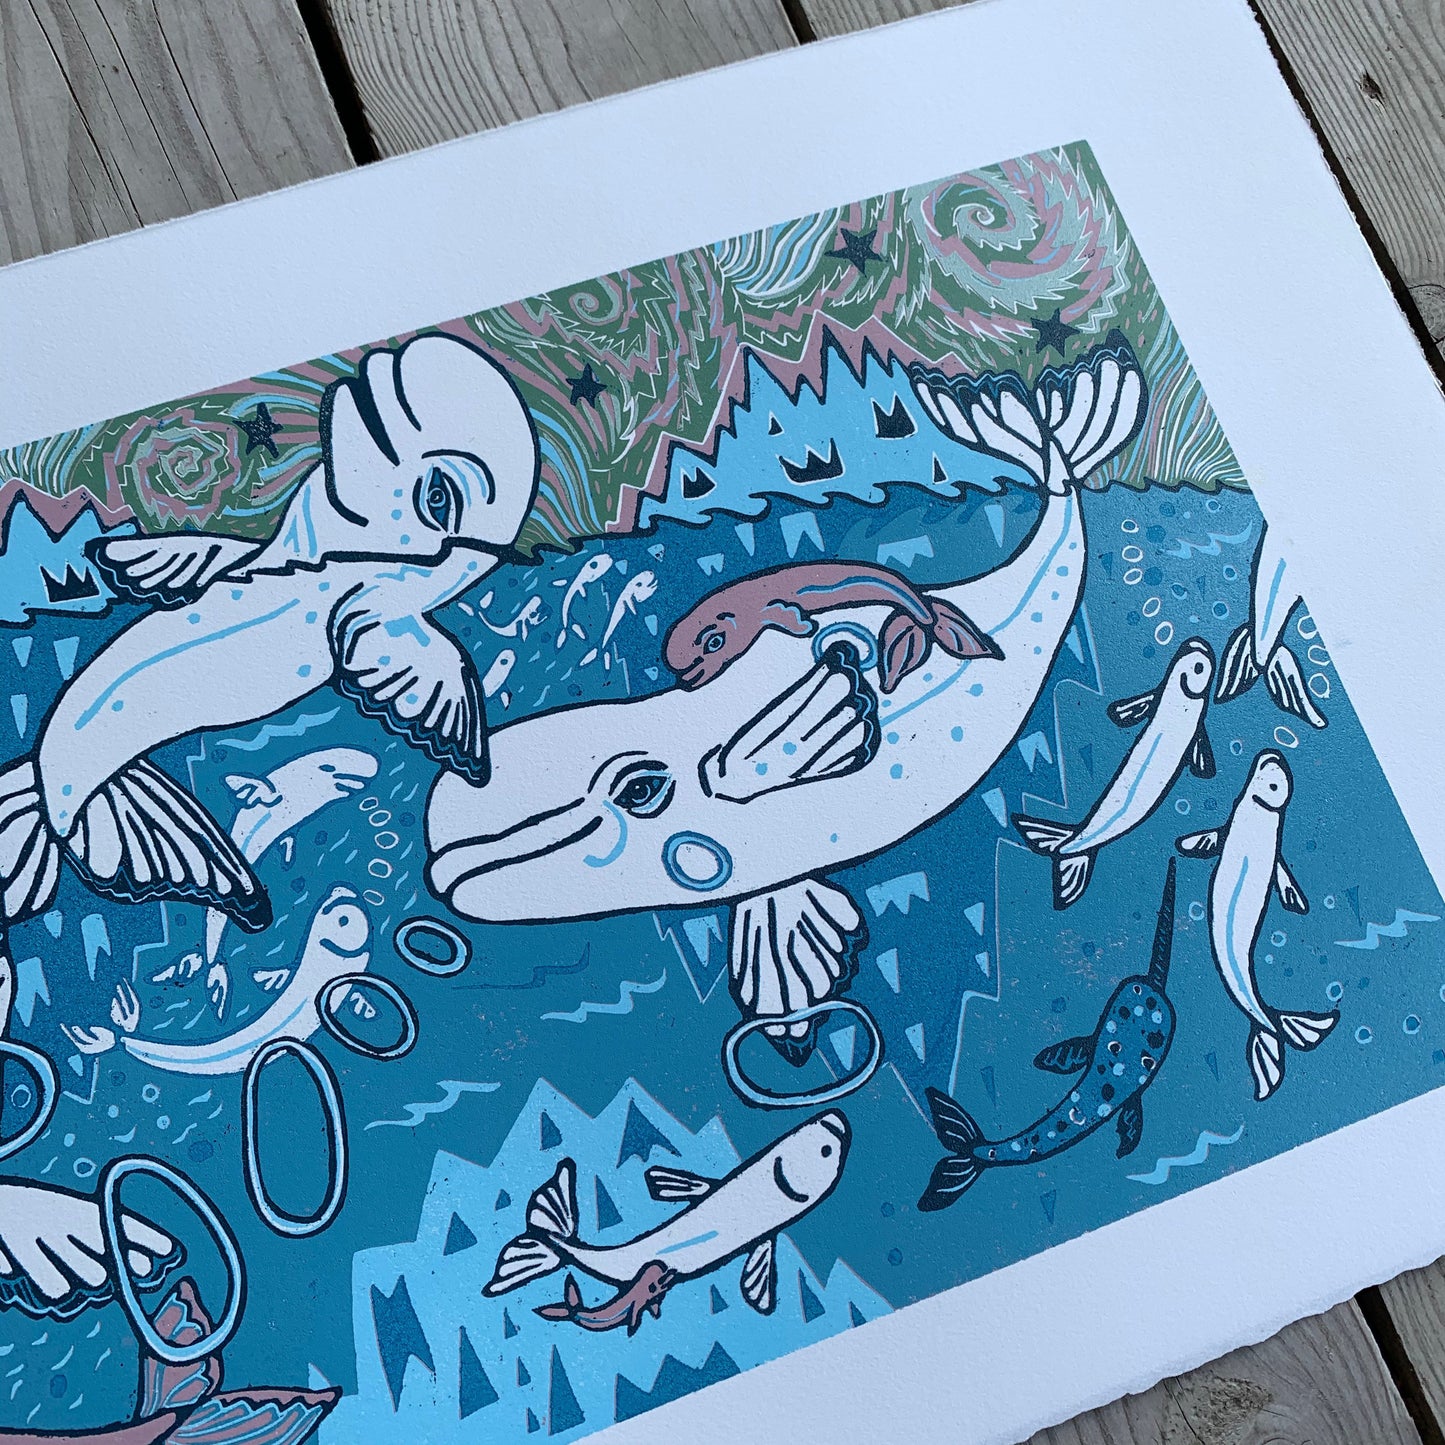 Beluga Woodcut without little whales in the big whales